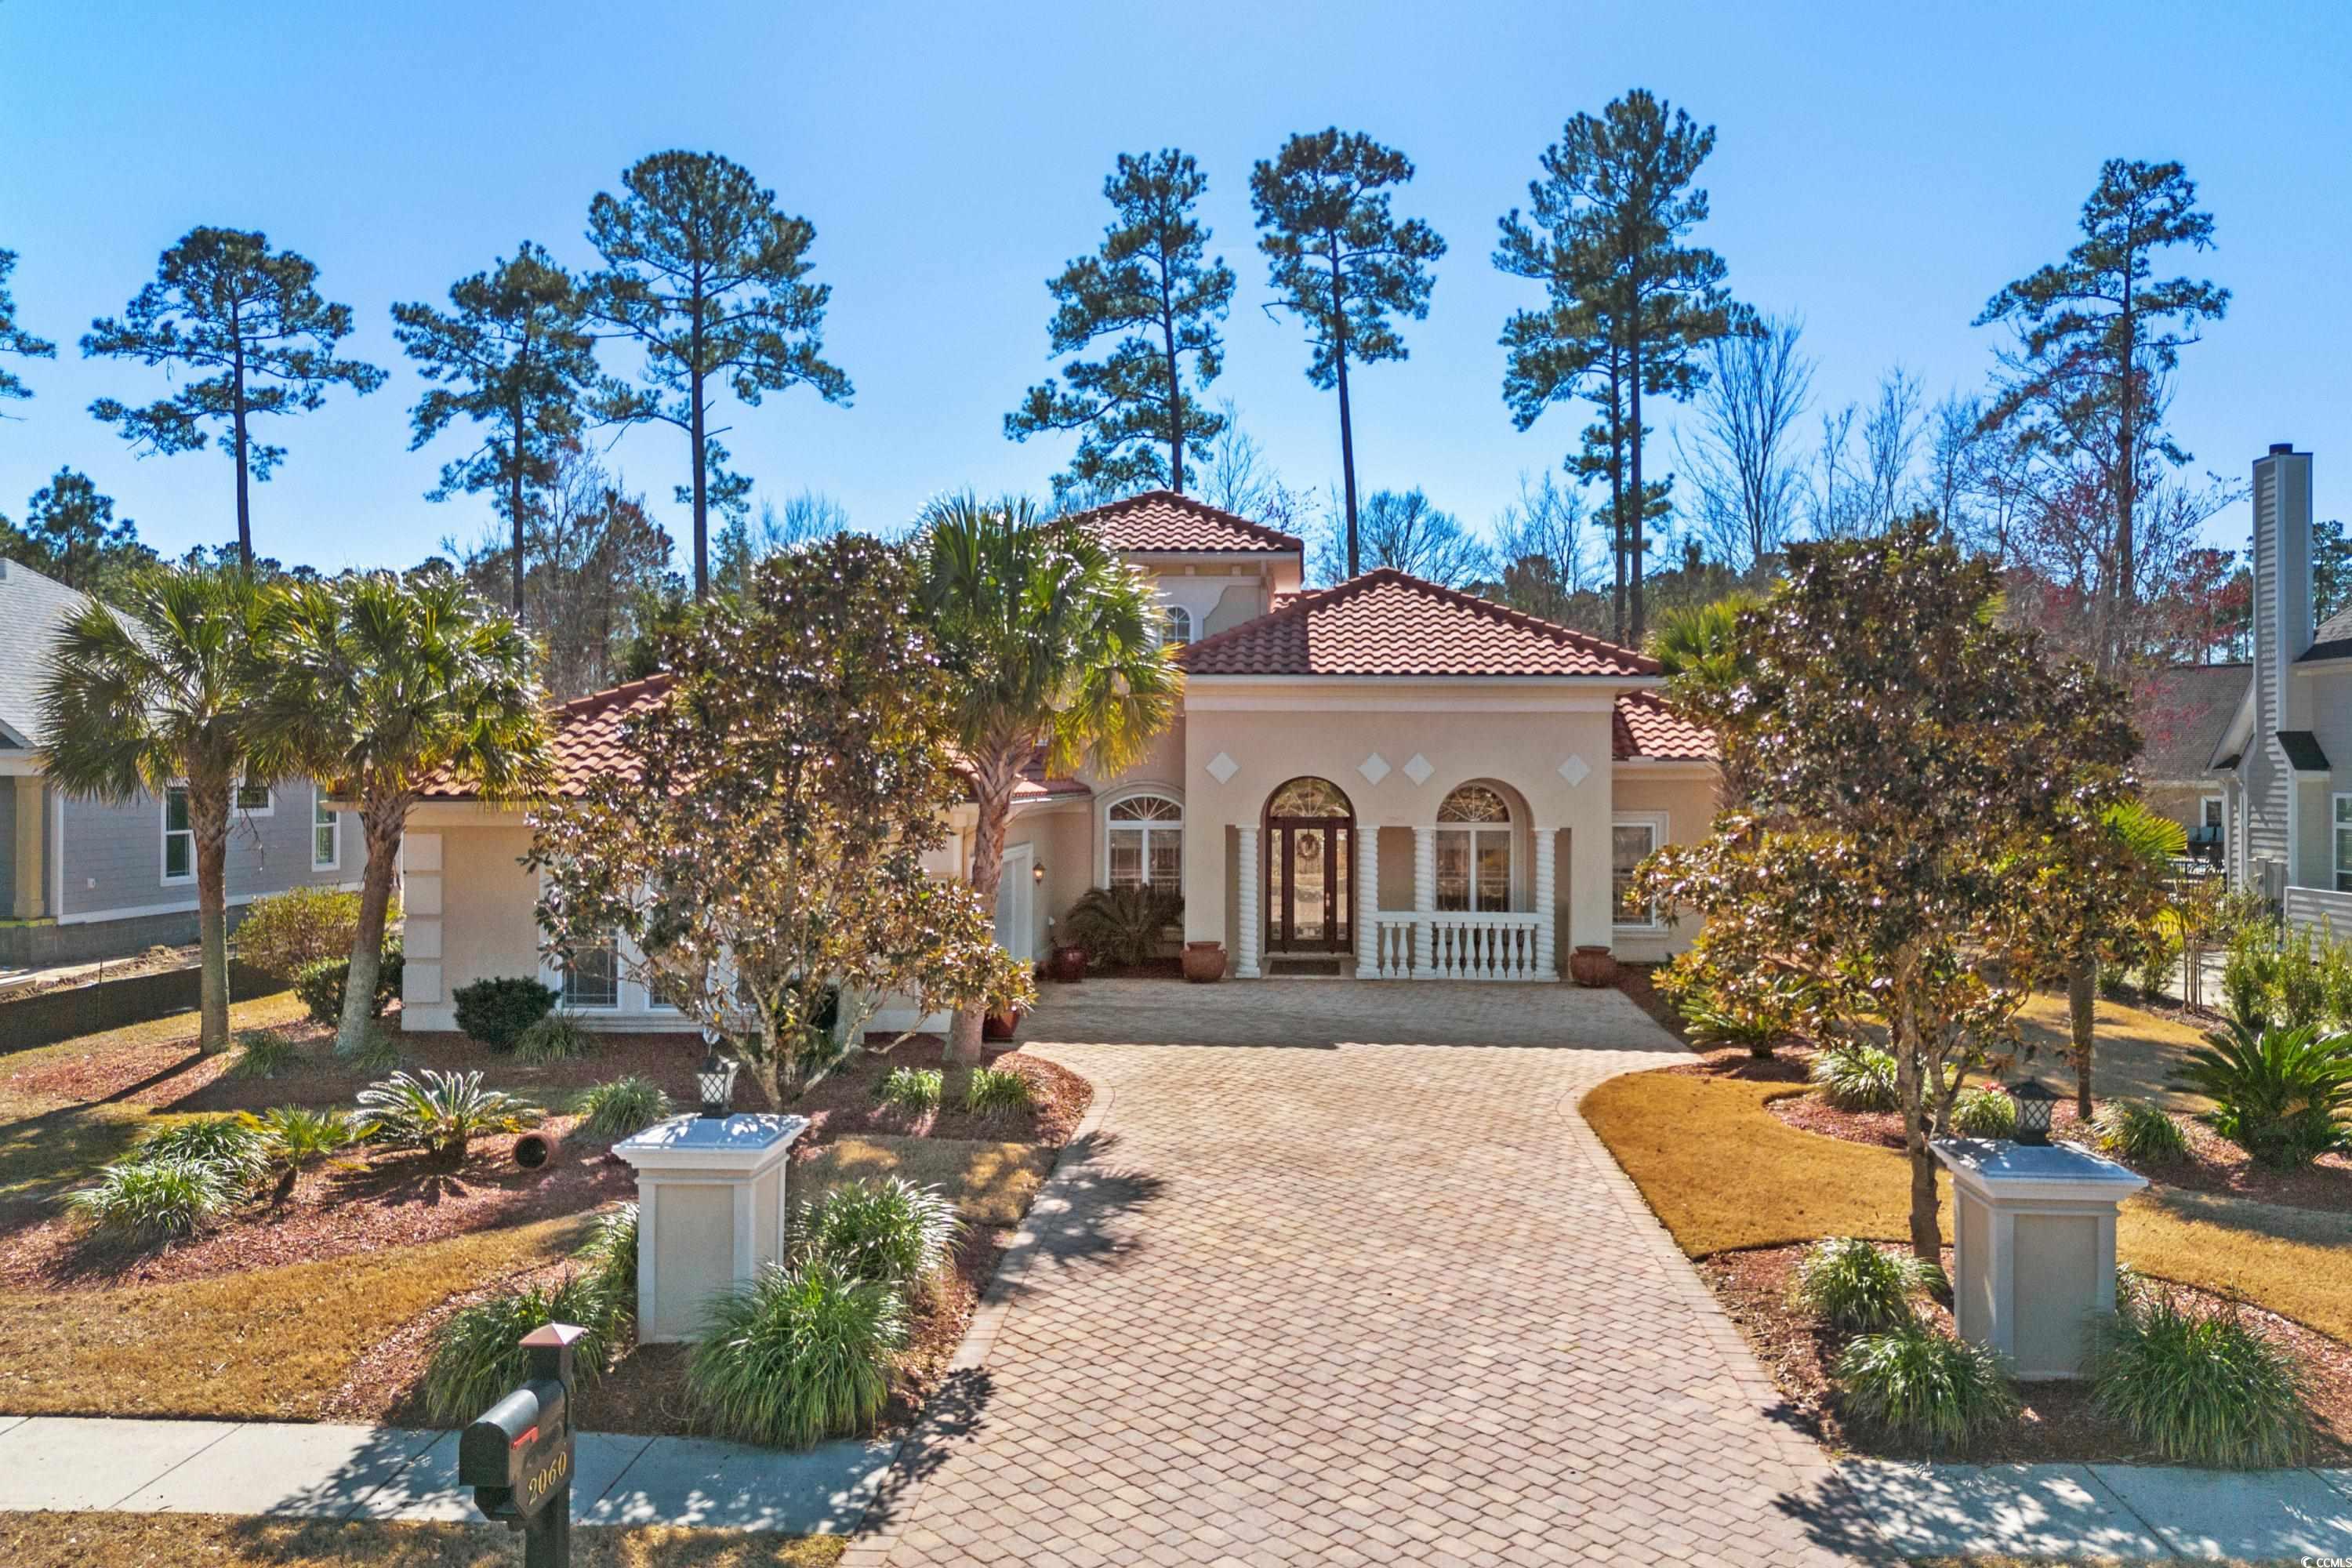 mediterranean dream home in one of myrtle beach's finest planned communities, cypress river plantation! this home is located in a gated neighborhood with 24-hour security, tennis and basketball courts, club house, and an amazing pool that you just have to see. the home is perfectly sized with large living spaces and was custom built with extreme details and great foresight for ease of living. the architectural design is breathtaking: every room has a different custom tray or coffered ceiling with decorative ceiling fans. the master boasts large walk in closets and a tile walk in shower. brand new state of the art cameras throughout, surround sound in the living room & veranda, cable & phone outlets in all the rooms including kitchen and veranda, and so many other features make this home a dream to live and entertain in!! a central vacuum and tank-less water heater, add to this home's functionality and efficiency. home has been very lightly lived in and is in better than new condition. the lot is large but easy to maintain. the back porch is a home of its own and no doubt where you will want to spend your days; boasting an approximately 1,100 sq. ft lanai with fans to keep you cool on those hot summer days.